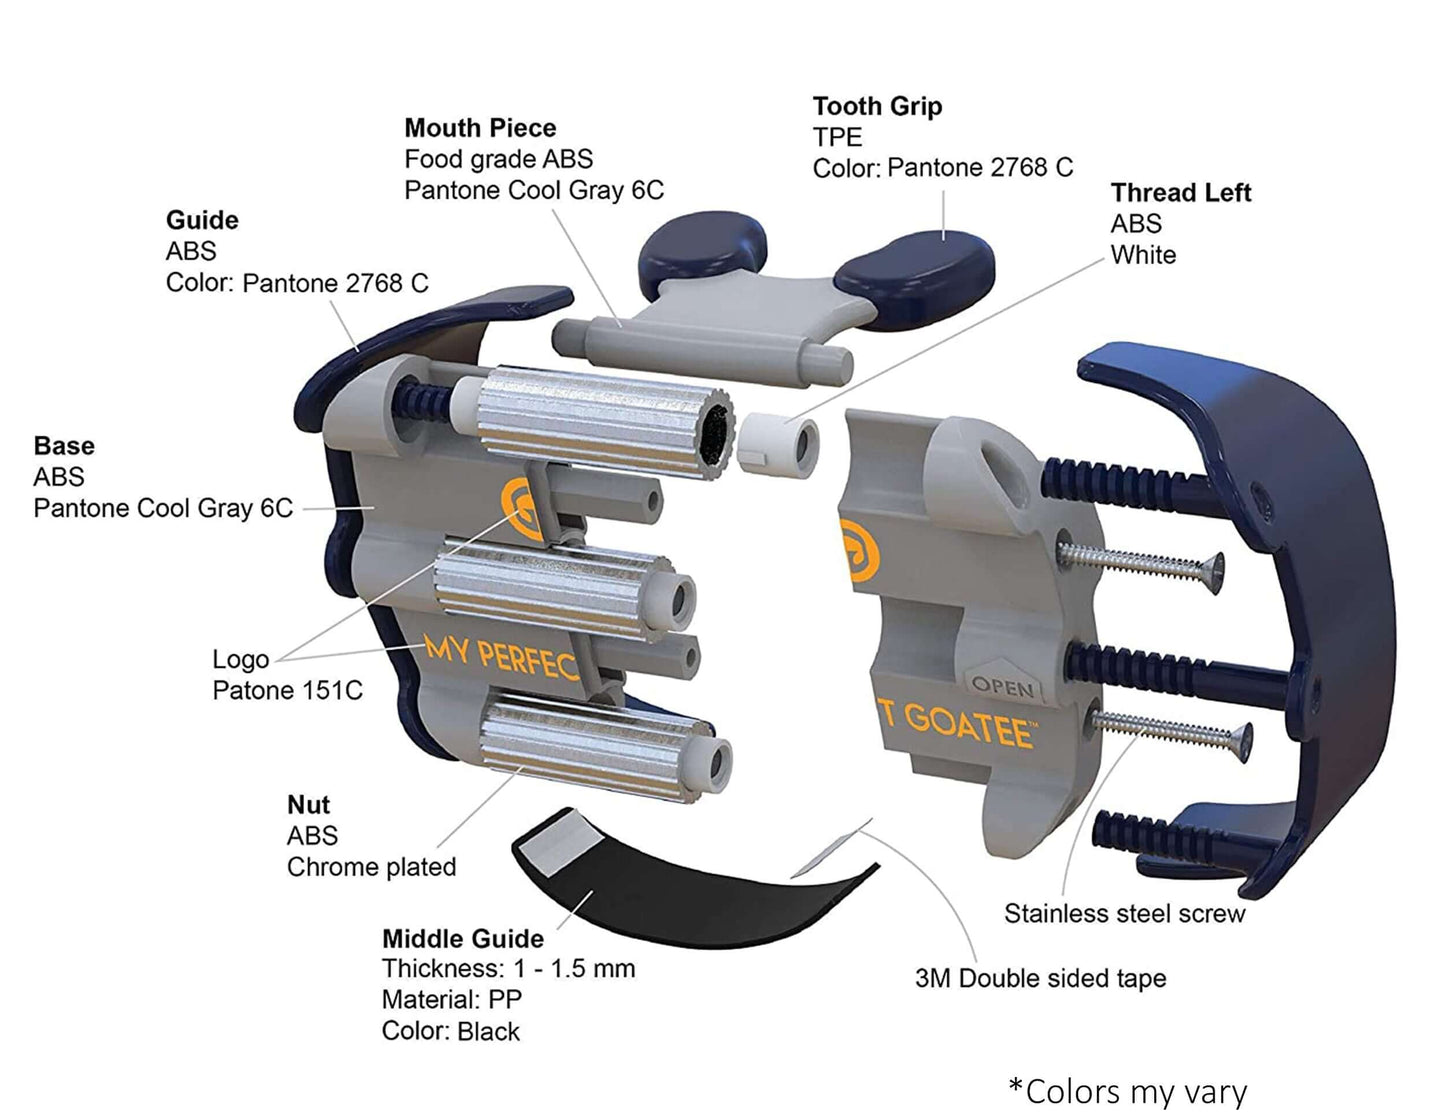 Exploded view image displaying the components and design of the My Perfect Goatee® Shaving Template product.